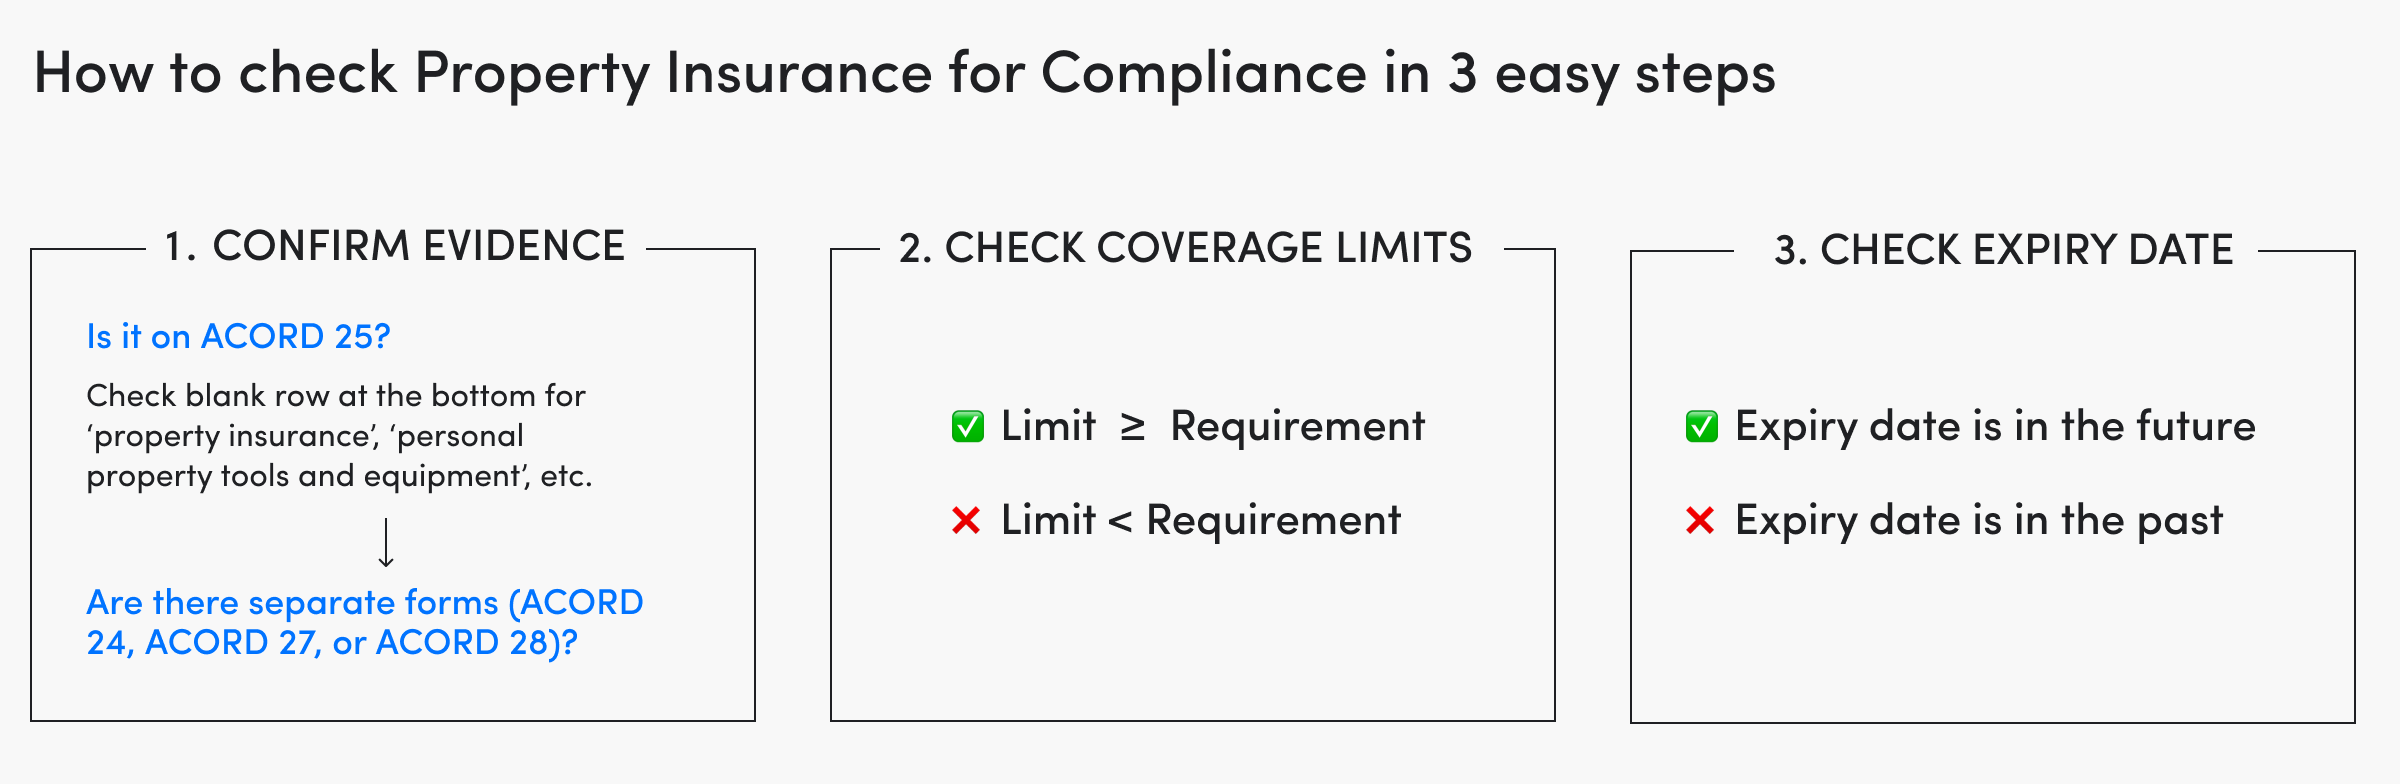 How to review Property Insurance for Compliance